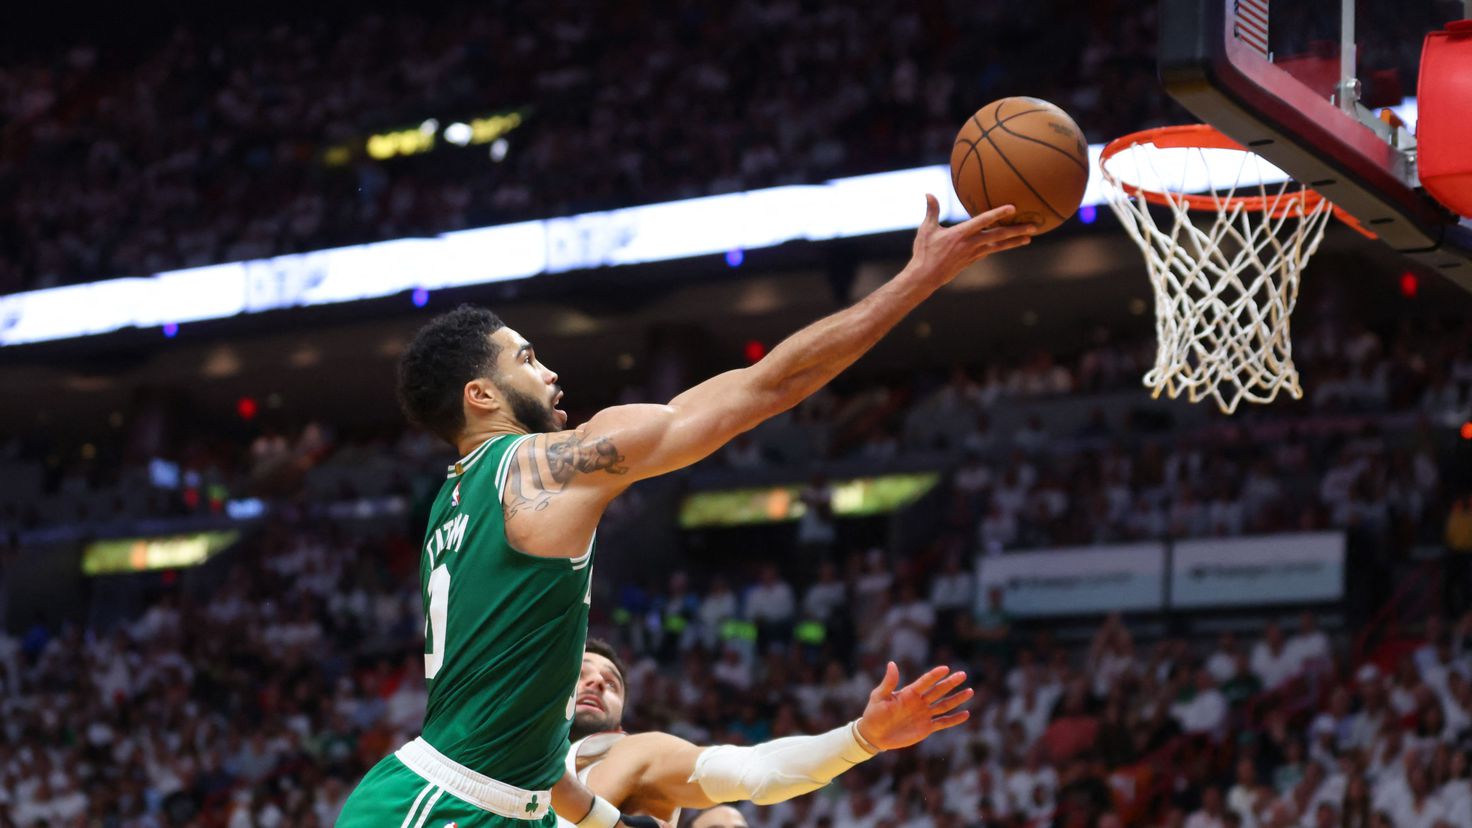 Jayson Tatum, following in the footsteps of LeBron James in the NBA Playoffs
